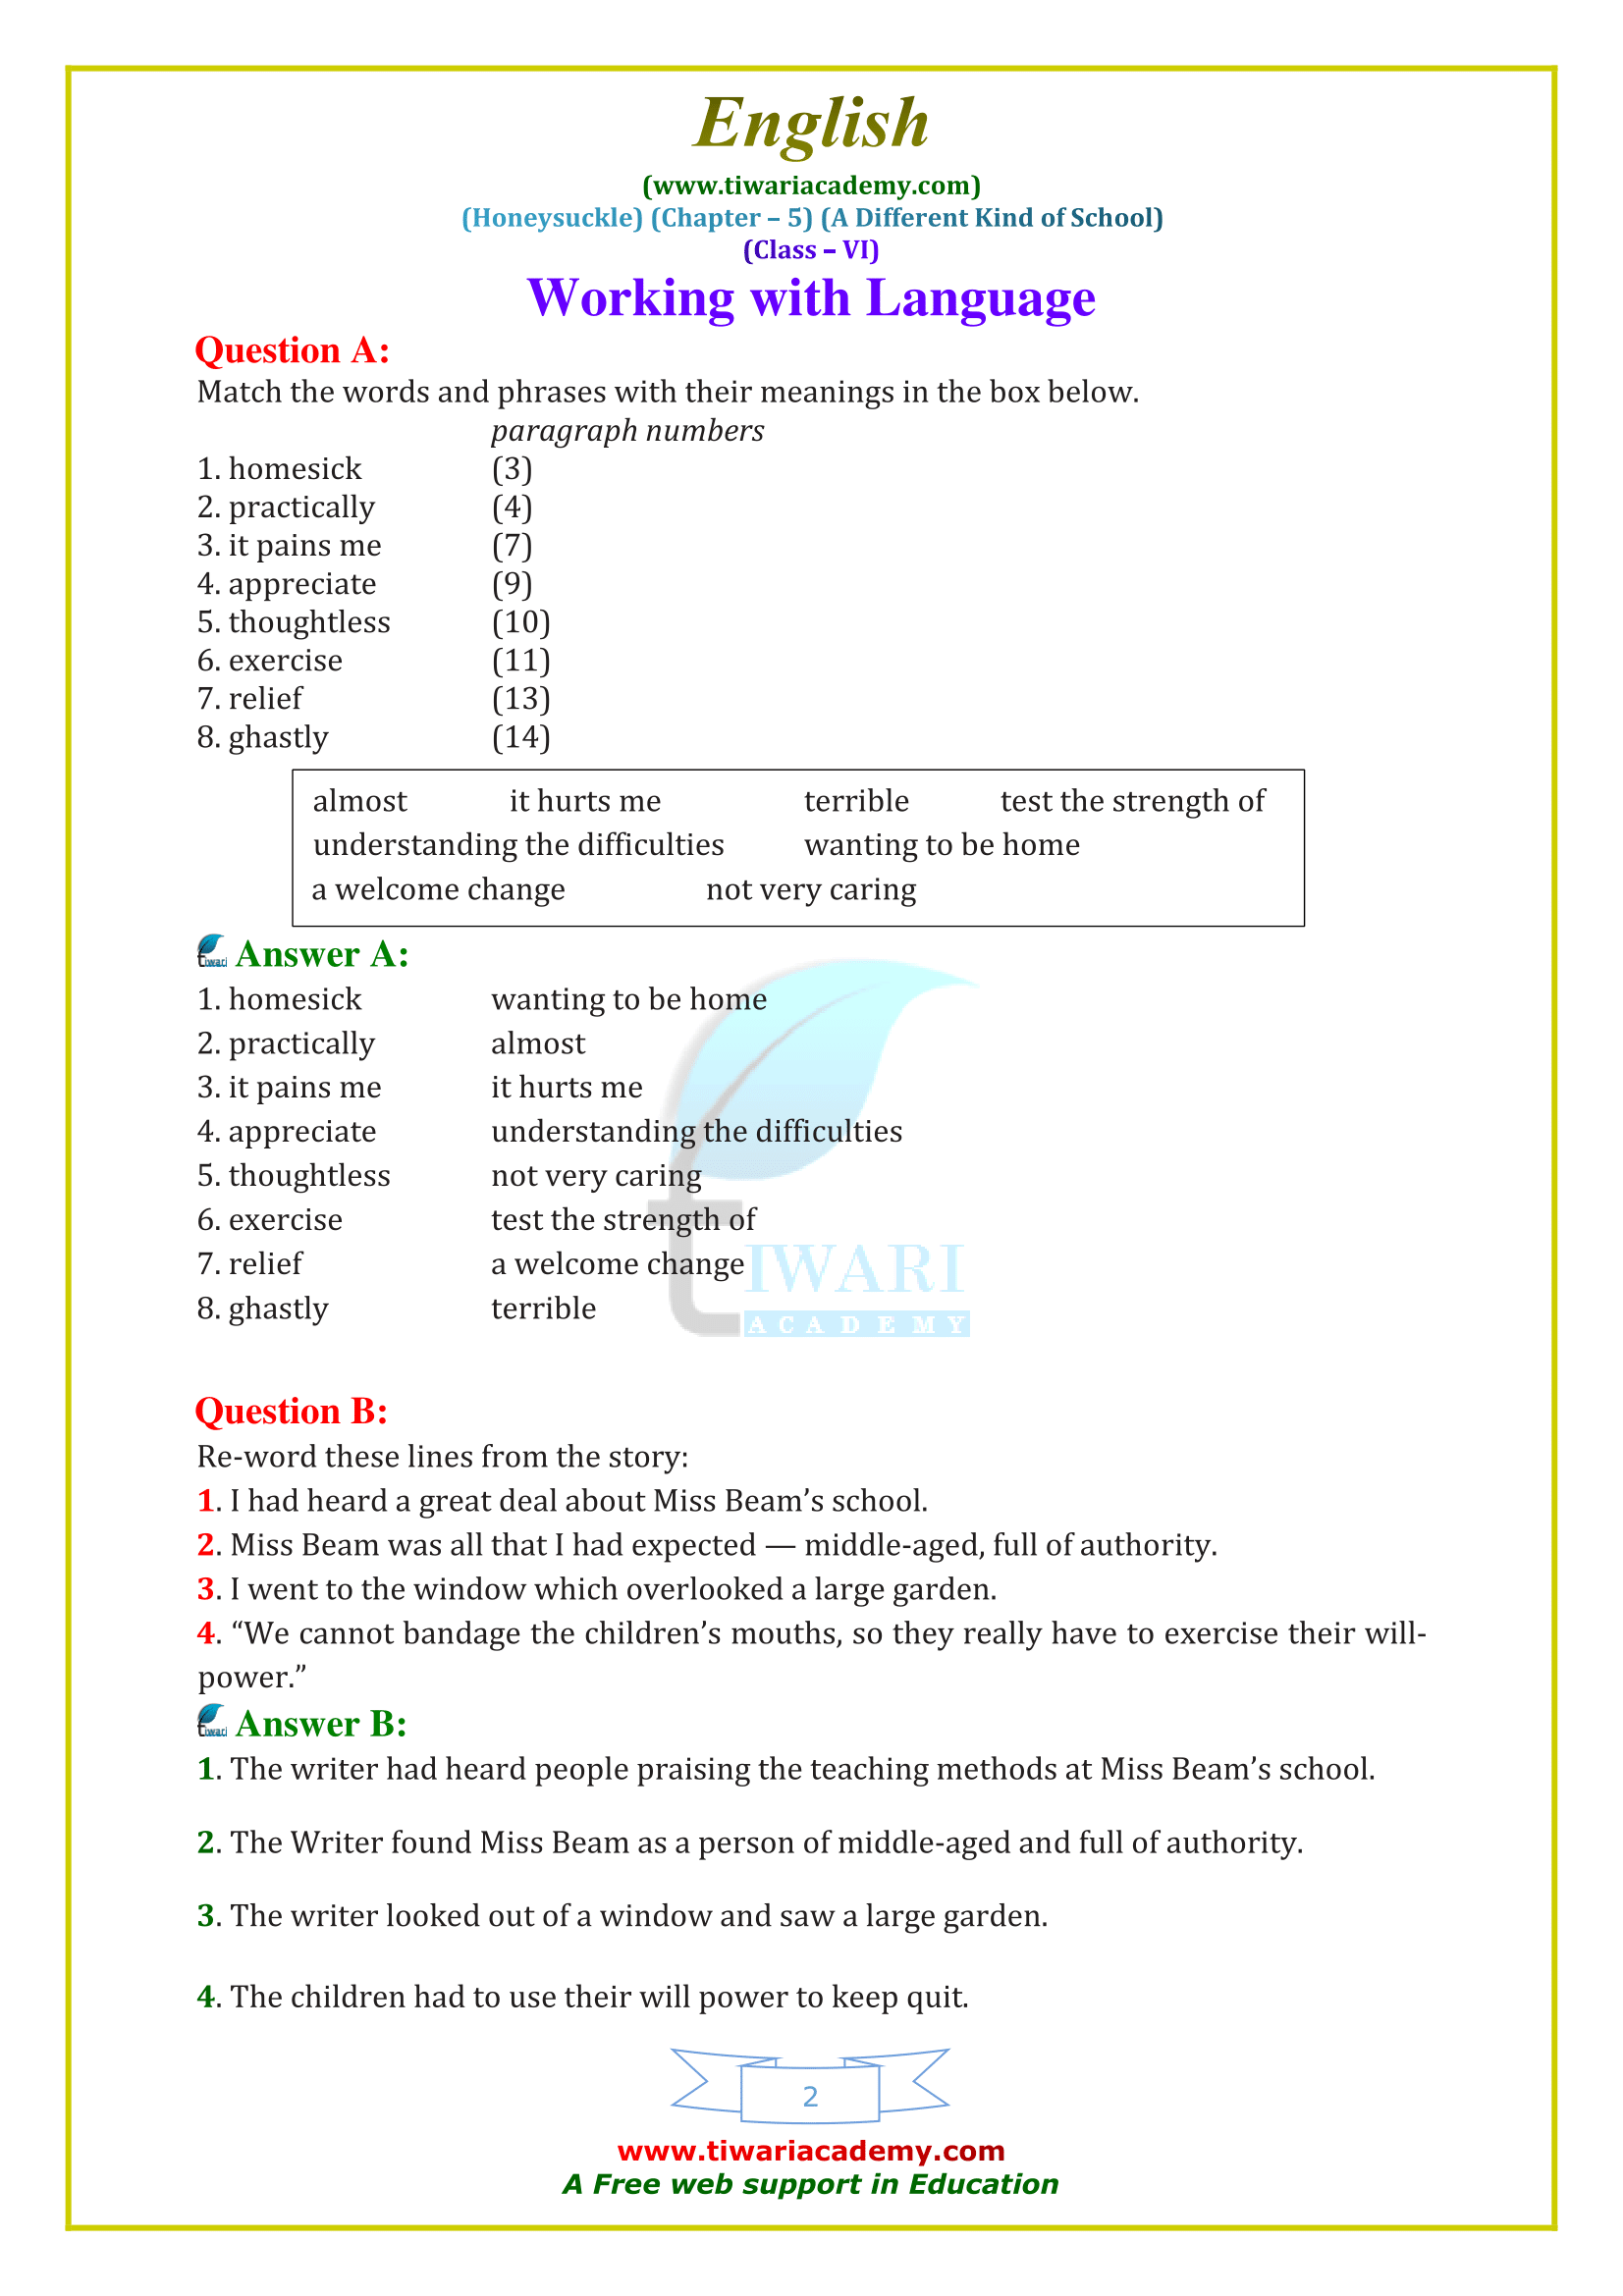 NCERT Solutions for Class 6 English Honeysuckle Chapter 5 in PDF form